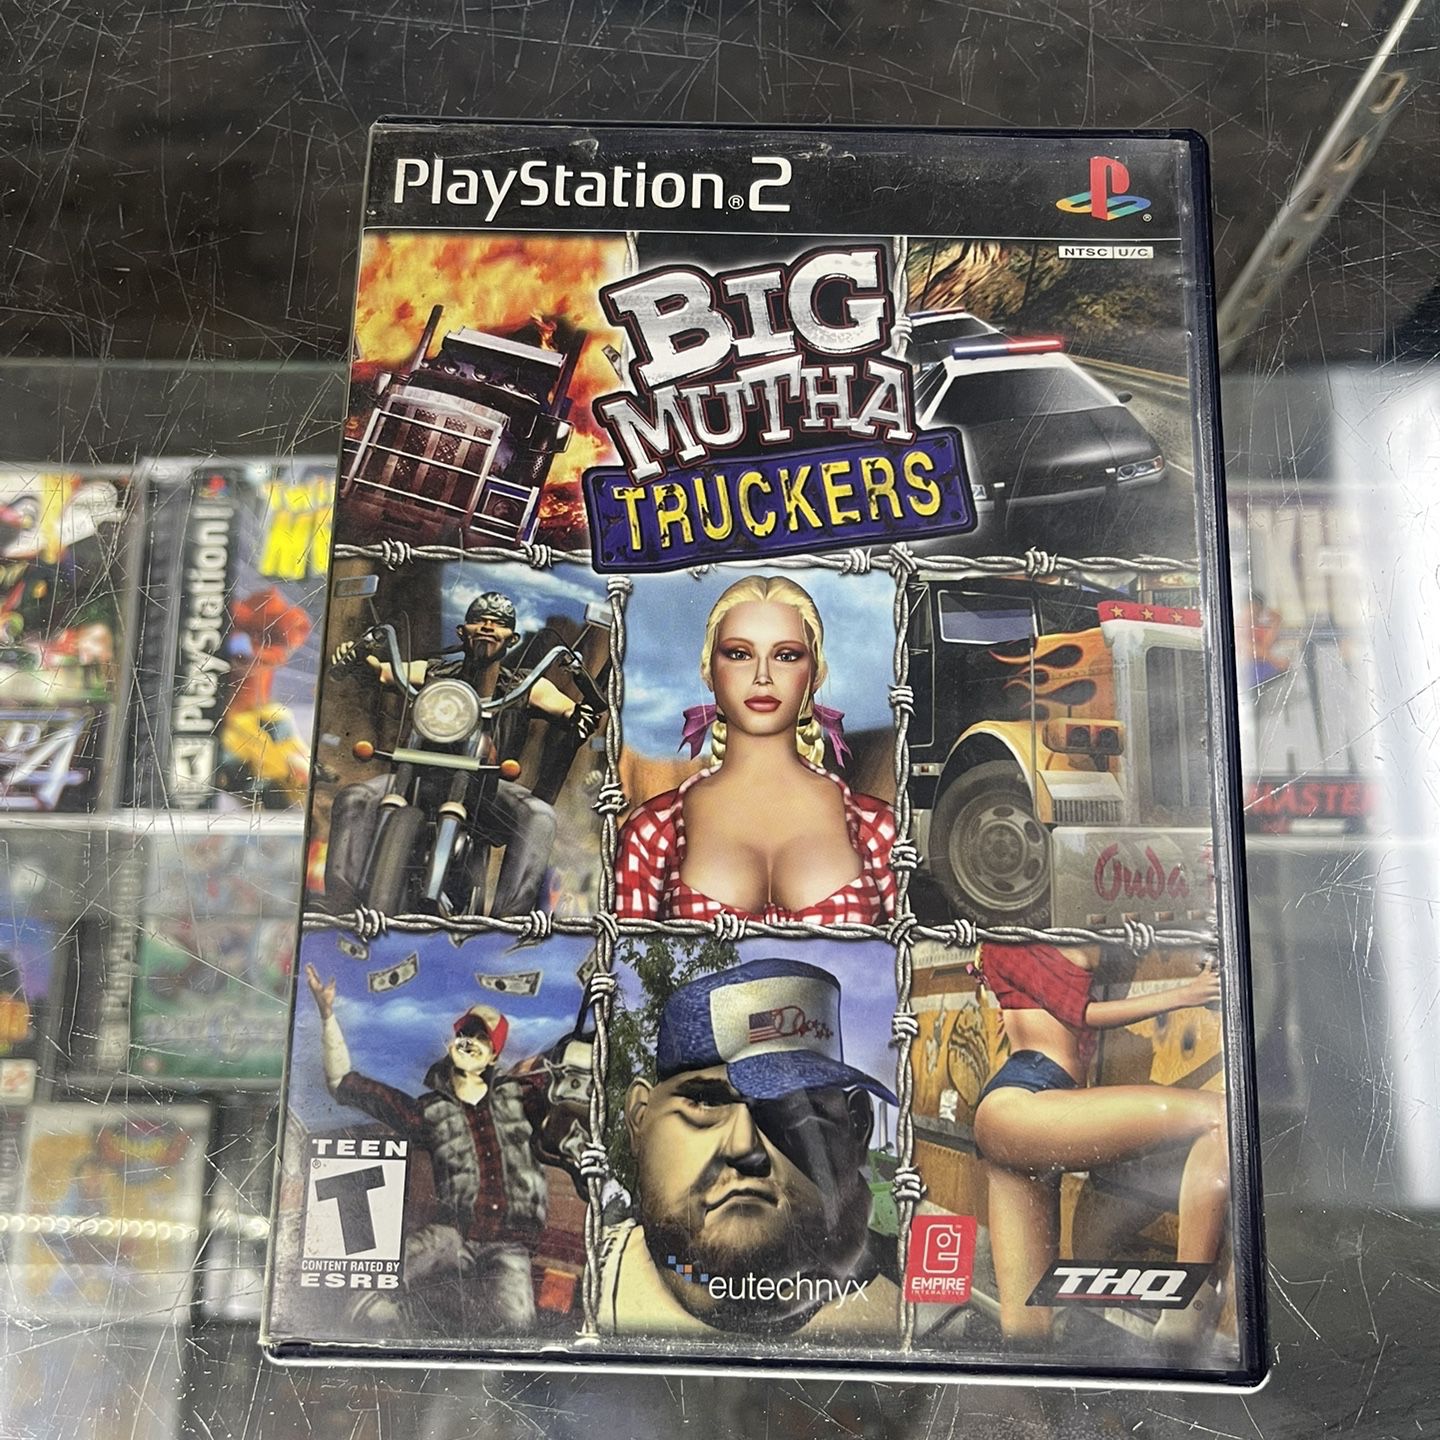 Big Mutha Truckers Ps2 $20 Gamehogs 11am-7pm